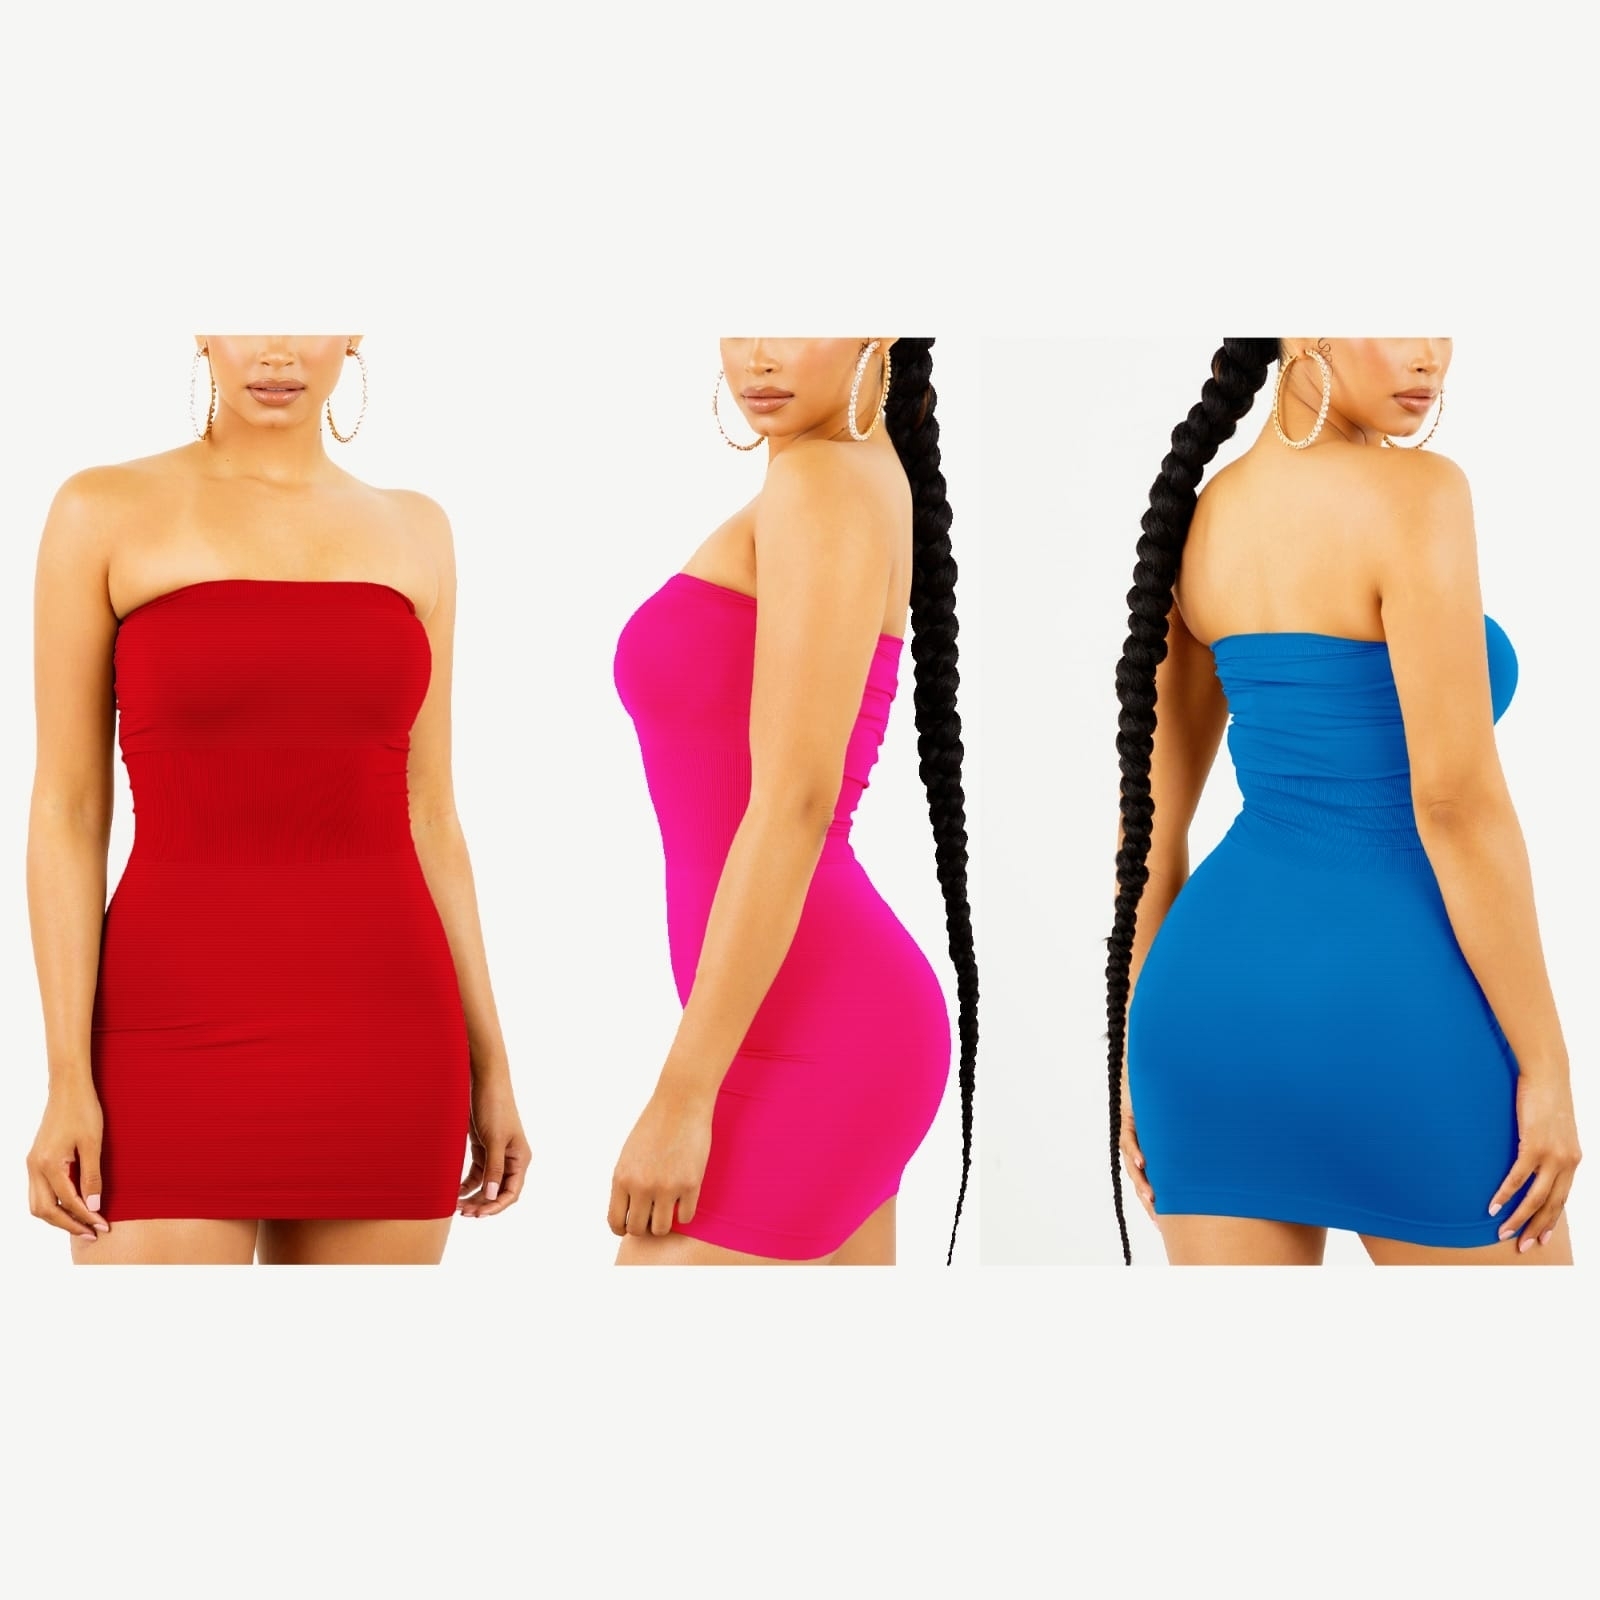 2-Pack Women's Strapless Stretchy Tight Fit Seamless Body Con Mini Tube Top Dress - RED, XL